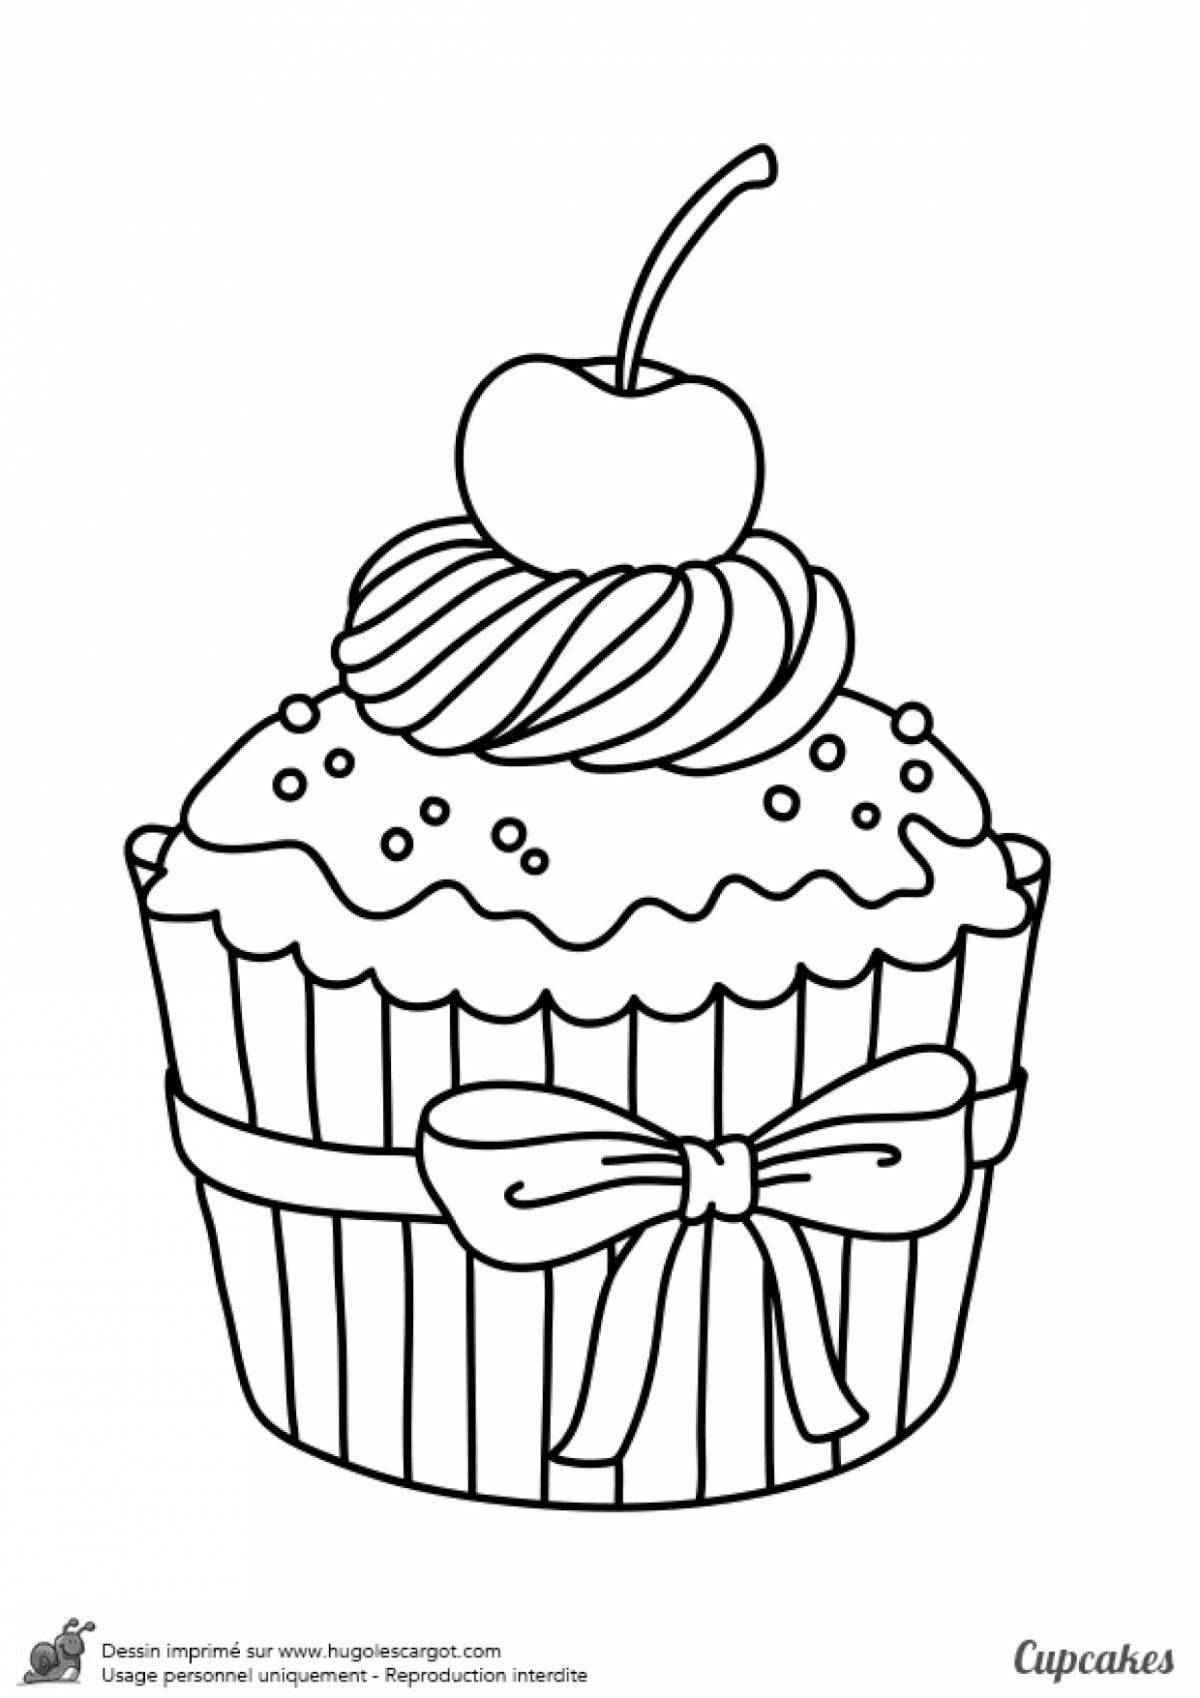 Delicious sweets coloring book for girls